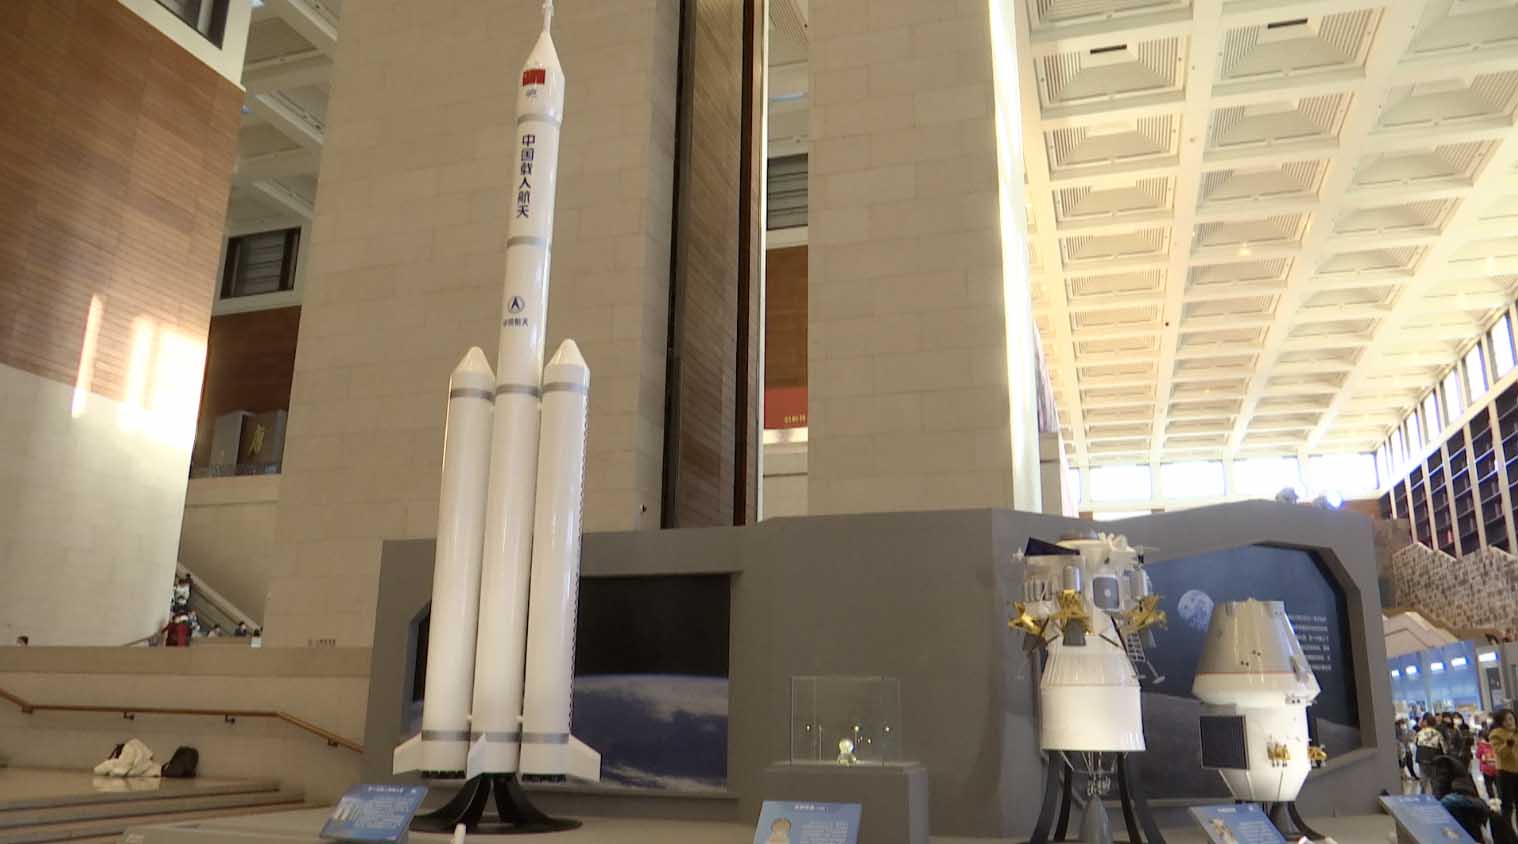 A model of China's next-generation carrier rocket is displayed at an exhibition in Beijing, China, February 24, 2023. /CGTN